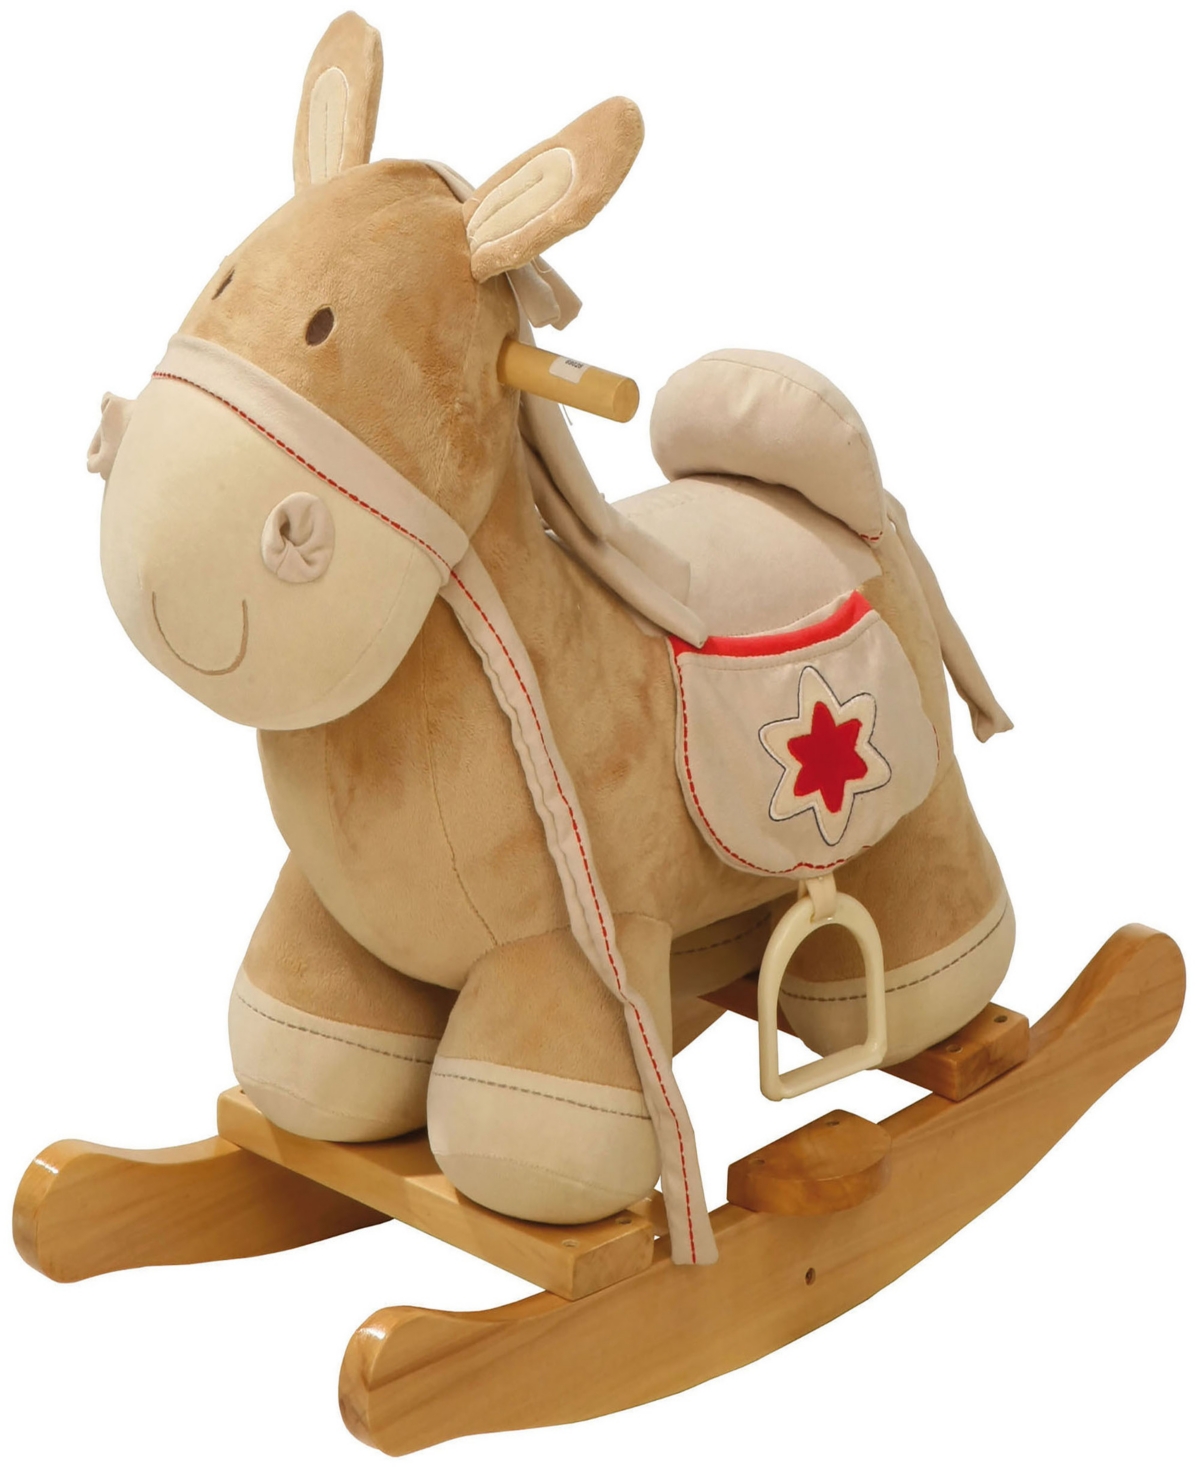 Roba-kids Babies' Rocking Horse Soft Plush Rocking Animal With Solid Wood Rocker Embroidered Upholstery Stirrup In Multi